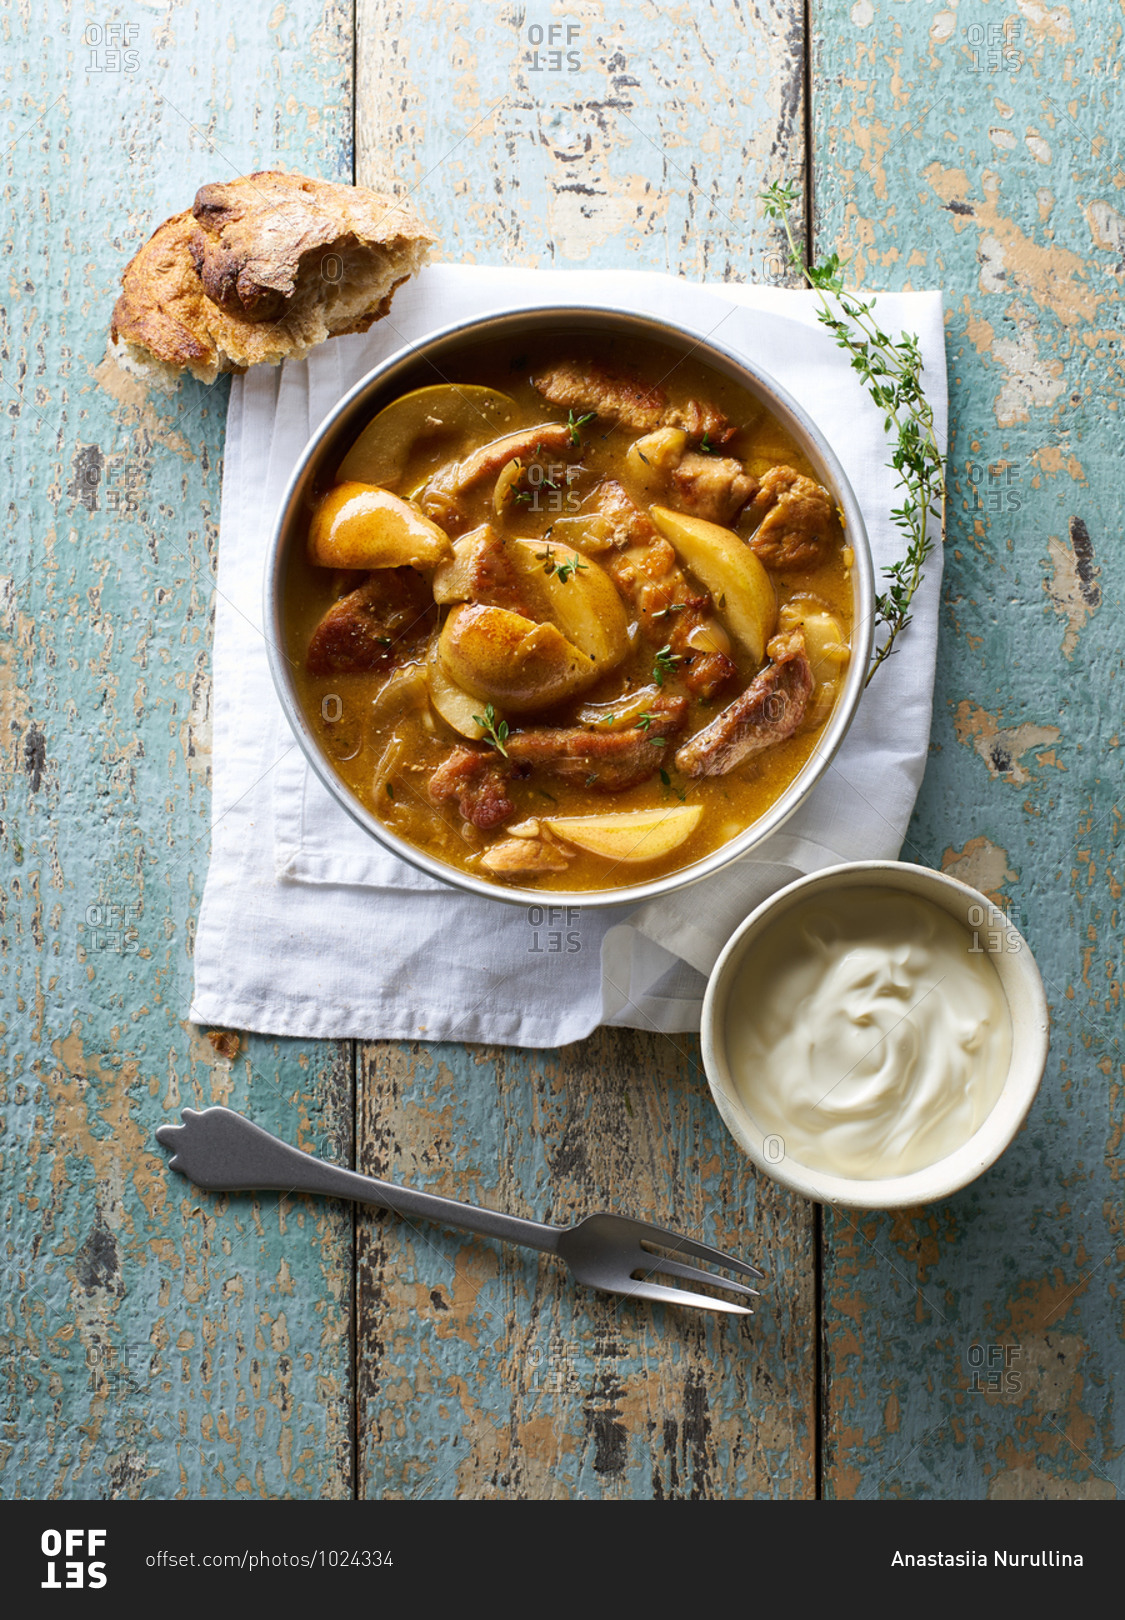 Pork and pear stew cooked with herbs and cider